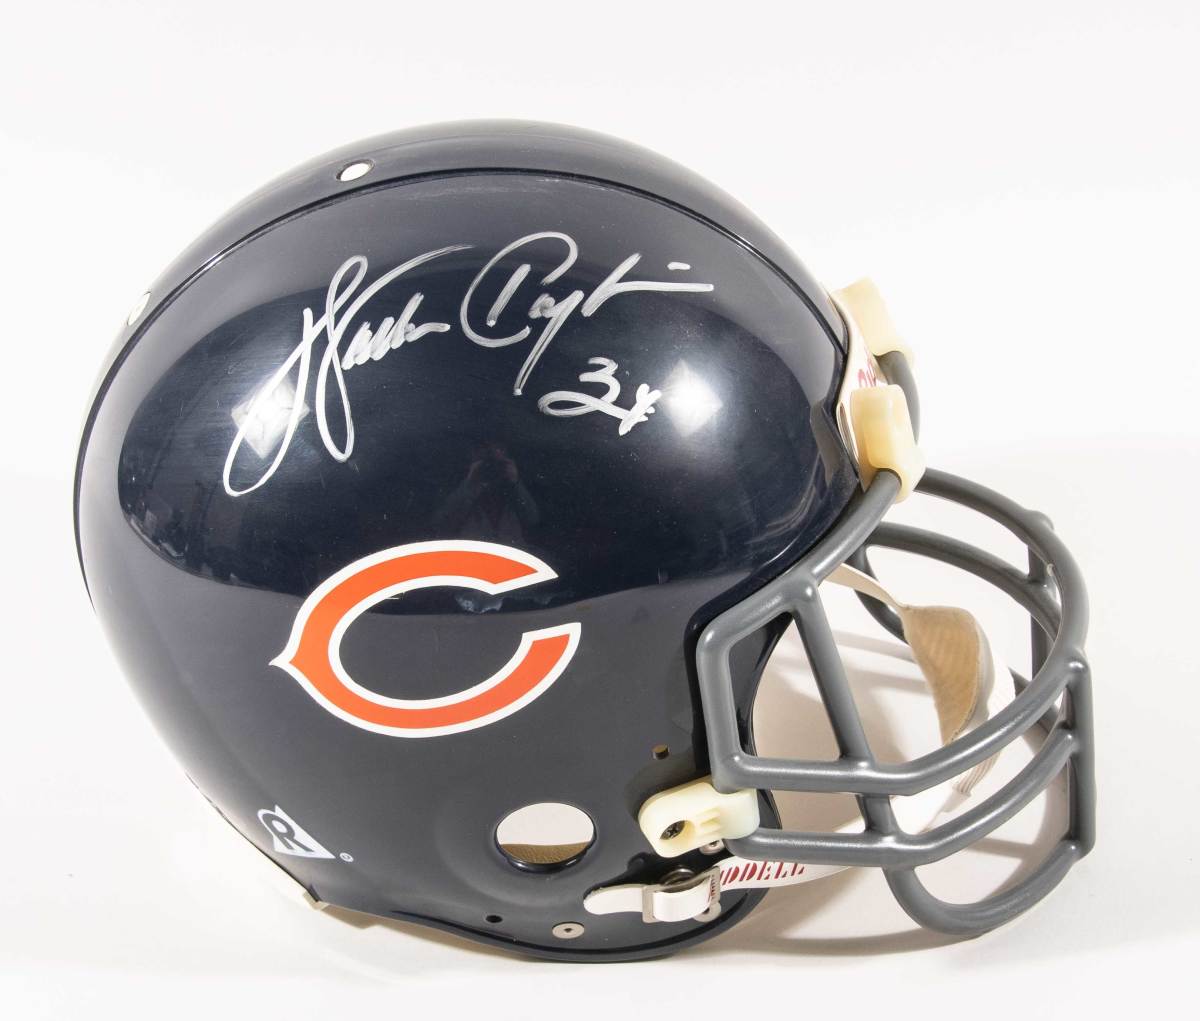 Chicago Bears helmet signed by Walter Payton and Gale Sayers from the Walter Payton Collection.